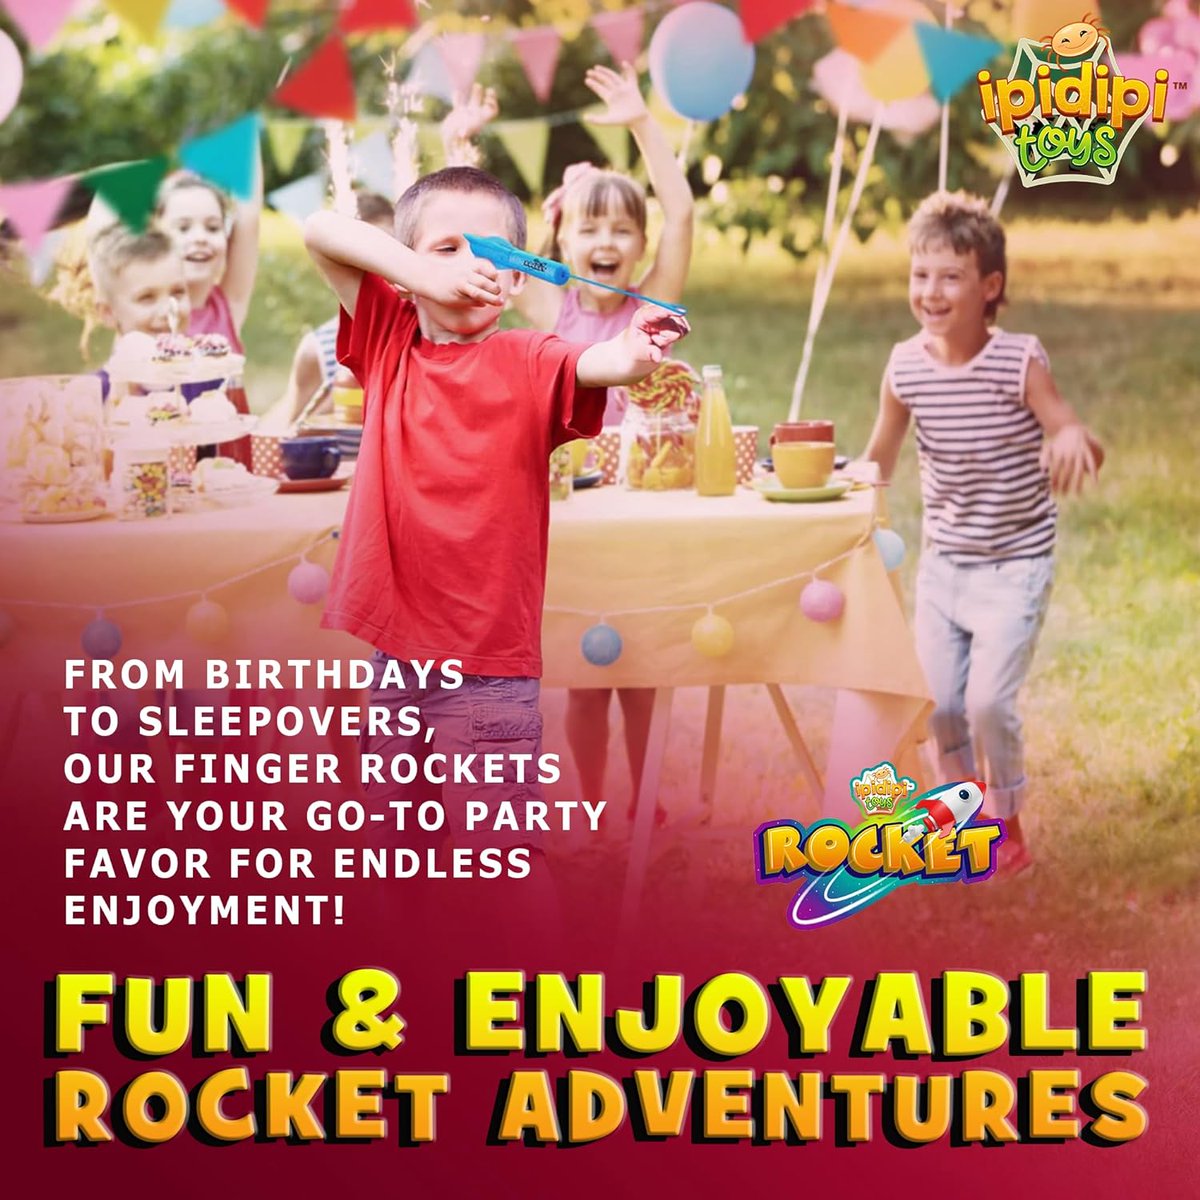 Blast into fun with Finger Rockets! Light up the night and ignite imaginations! The ultimate gift for endless entertainment. 🚀🎁 bit.ly/3QHn2w3  #Ipidipitoys #FingerRockets #OutdoorFun #GiftIdeas #idealGift #ImaginativePlay #NighttimeAdventure #EndlessEntertainment